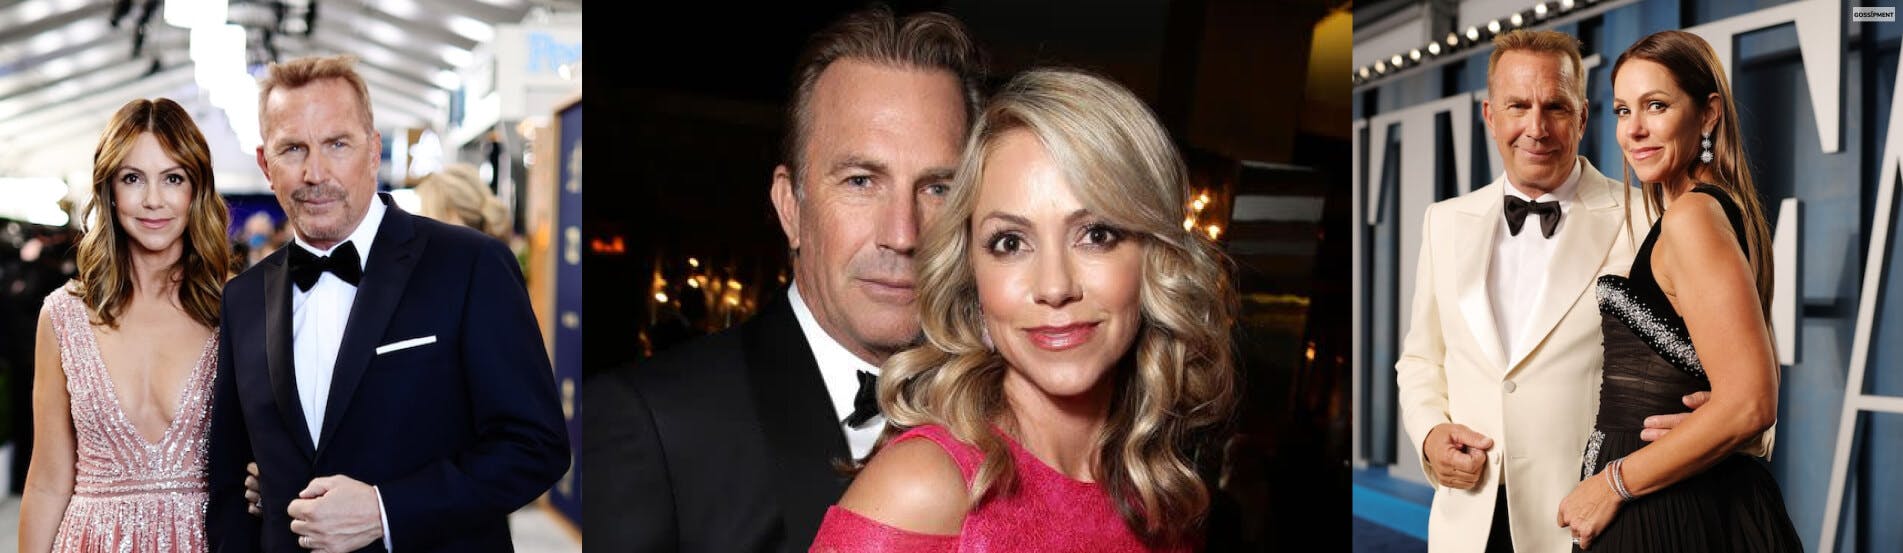 Cover Image for Kevin Costner’s Estranged Wife Christine Has to Pay $14K of Legal Fees To Attorneys